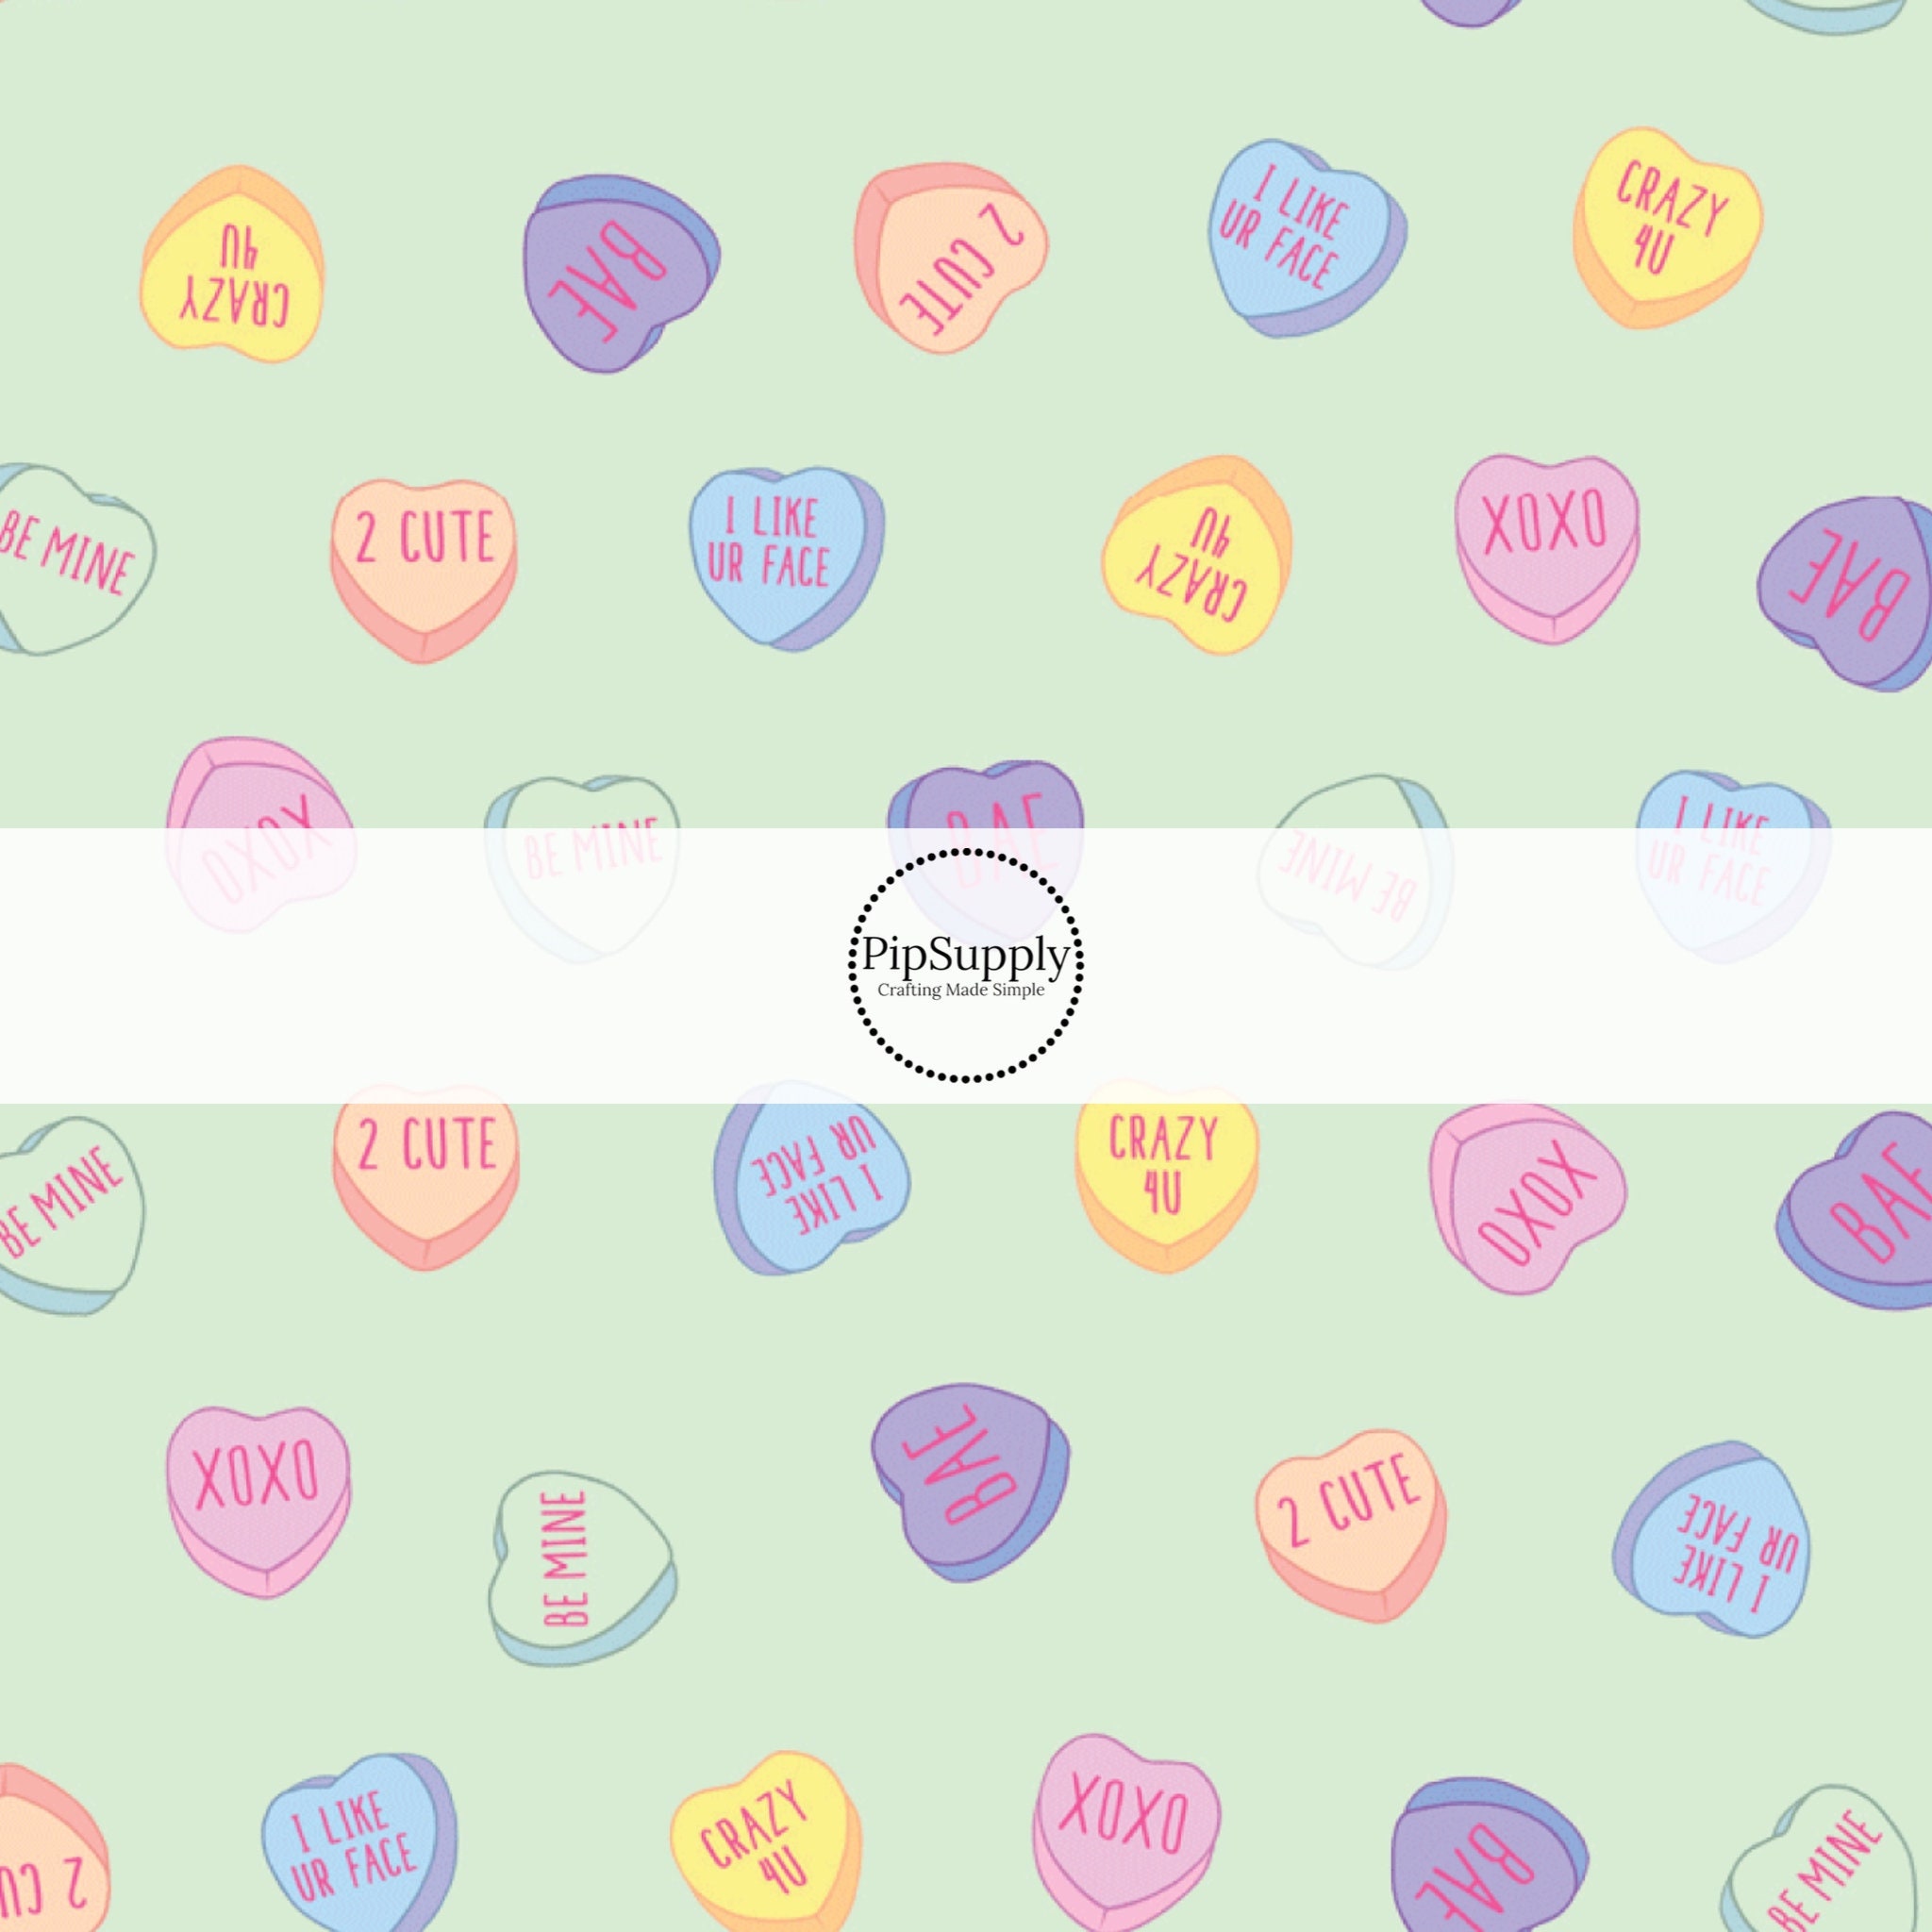 Cotton Conversation Hearts Candy Candies Sweets Sweethearts